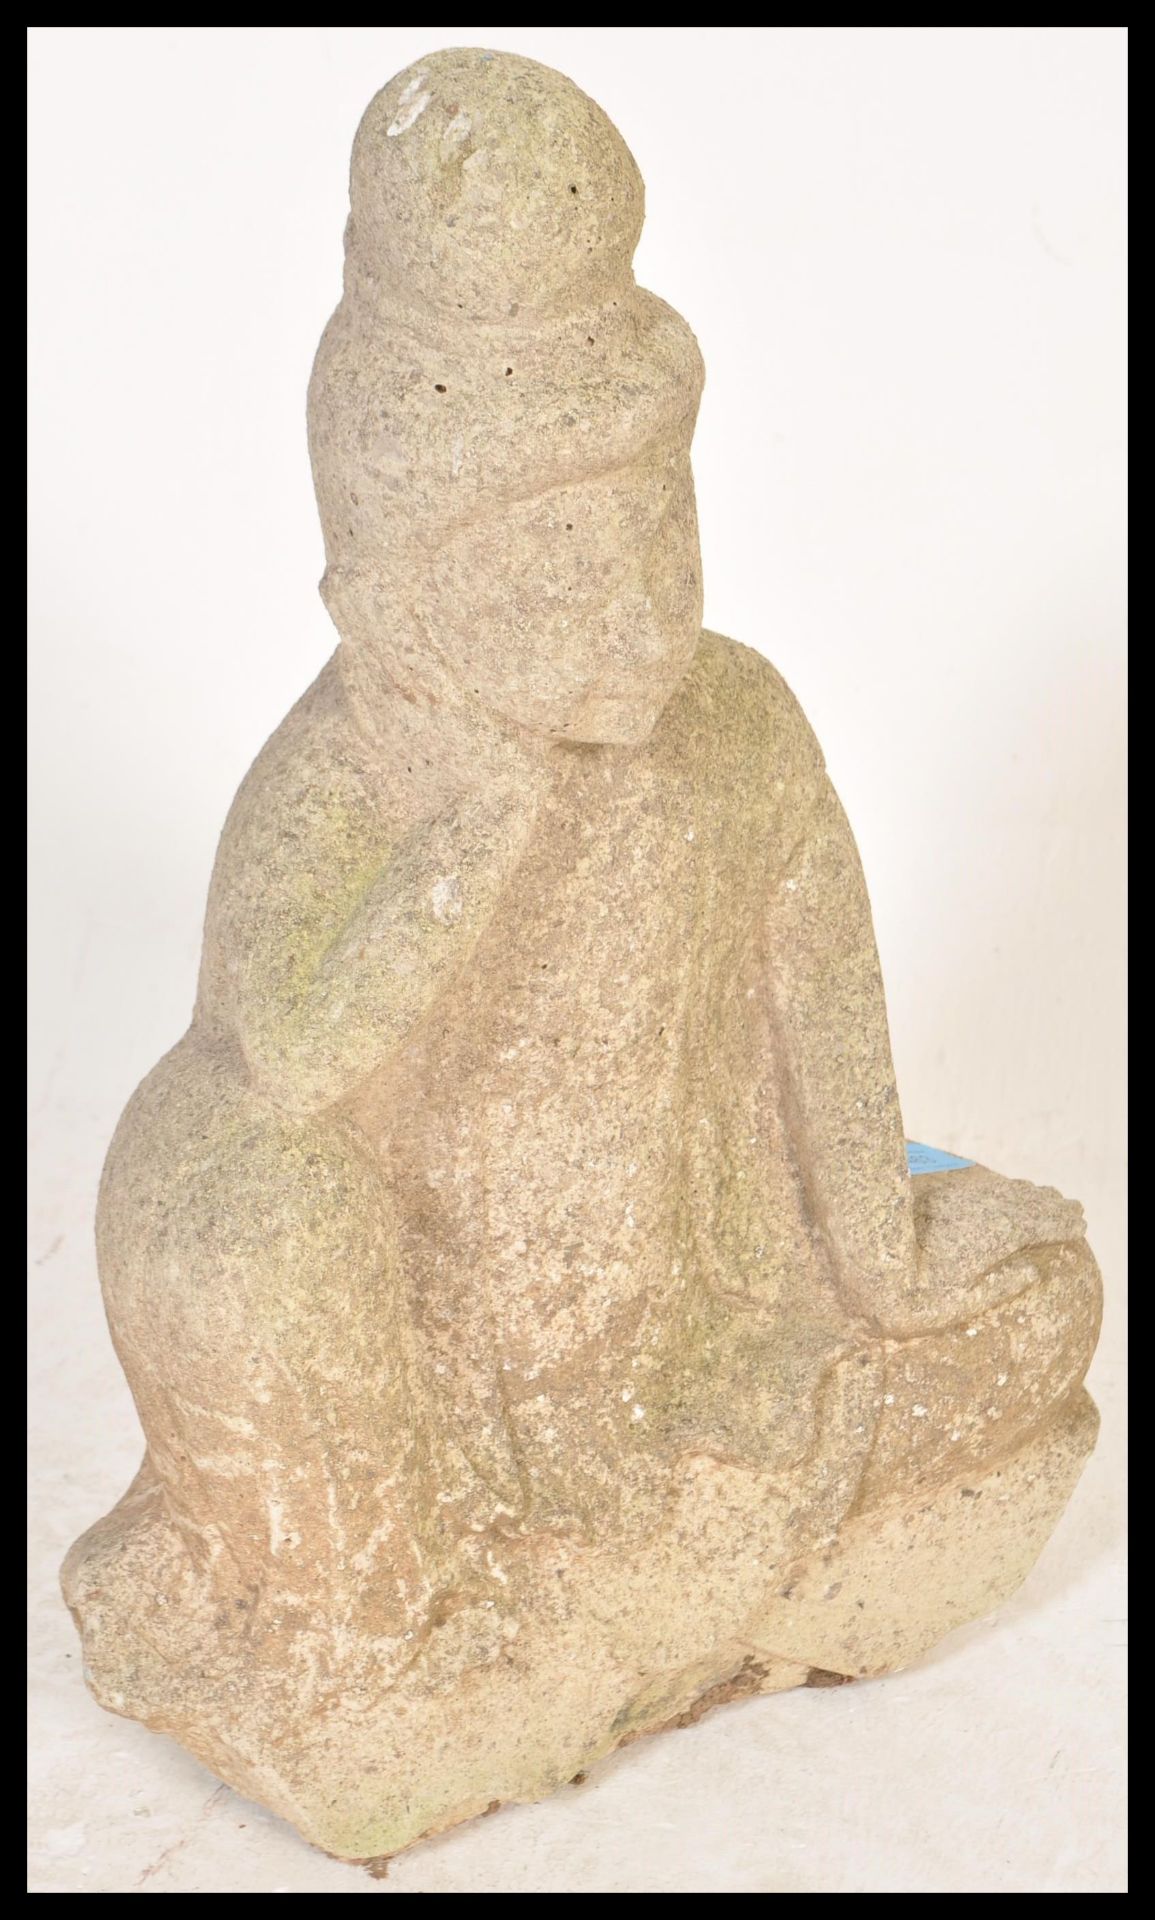 A well weathered garden reconstituted stone figure